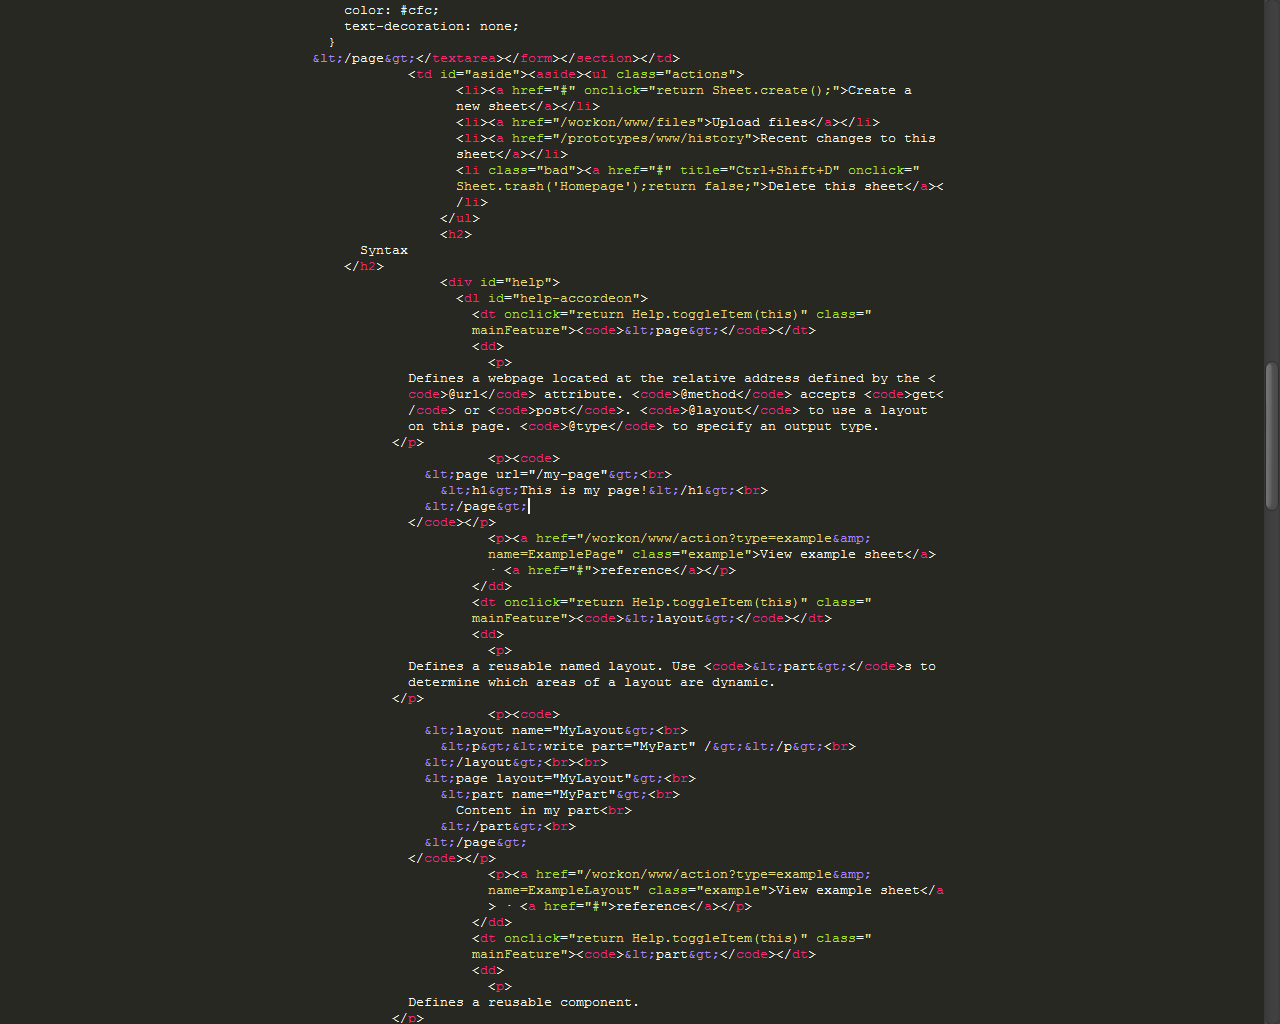 Sublime Text’s ‘distraction-free’ mode. Do you feel immersed?